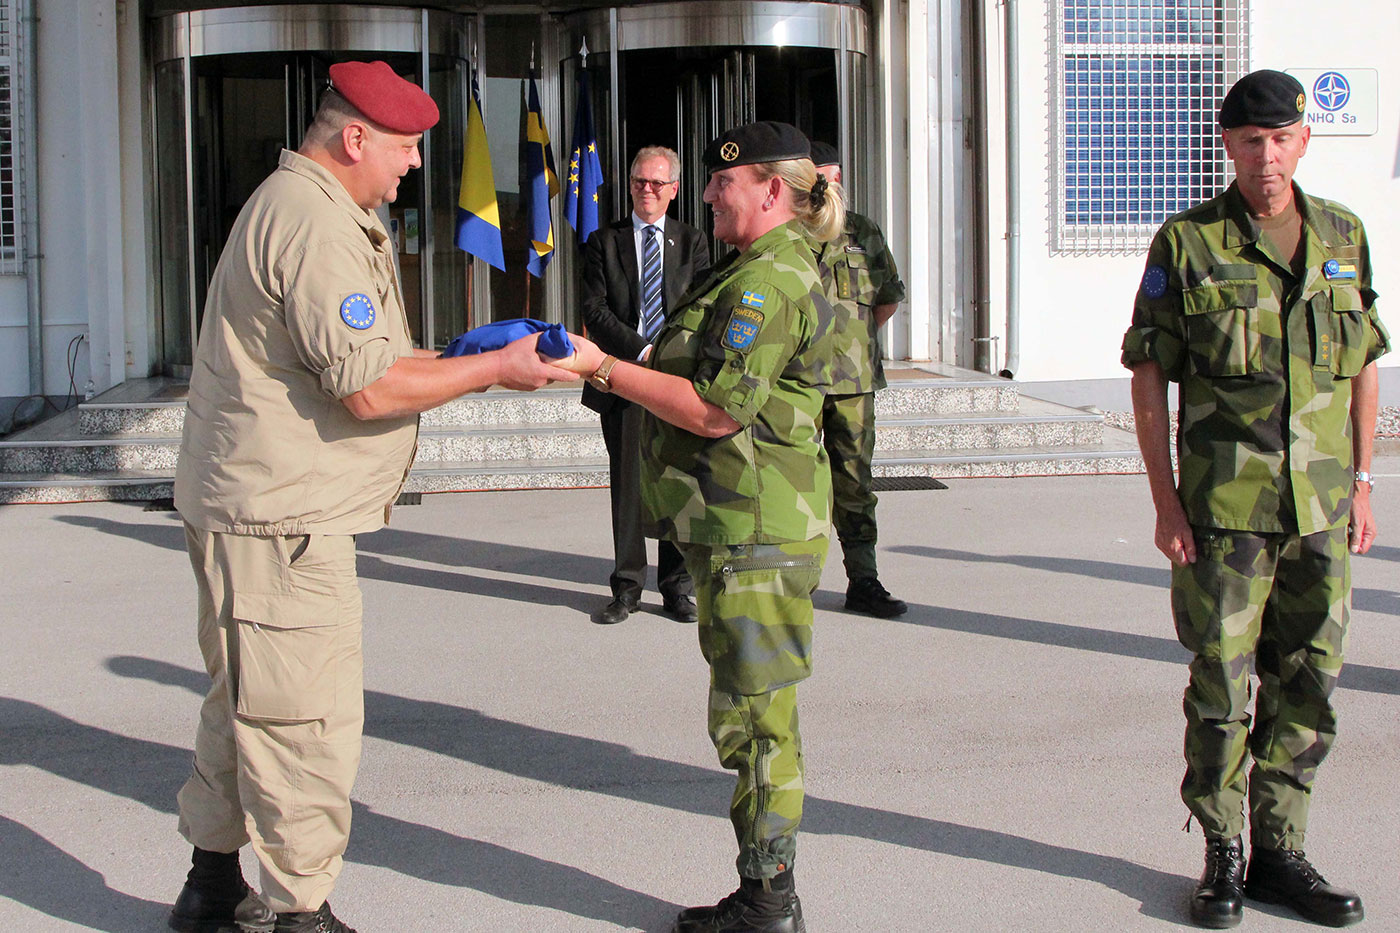 COMEUFOR Major General Schrötter presents the Swedish Flag to Colonel Wredes.